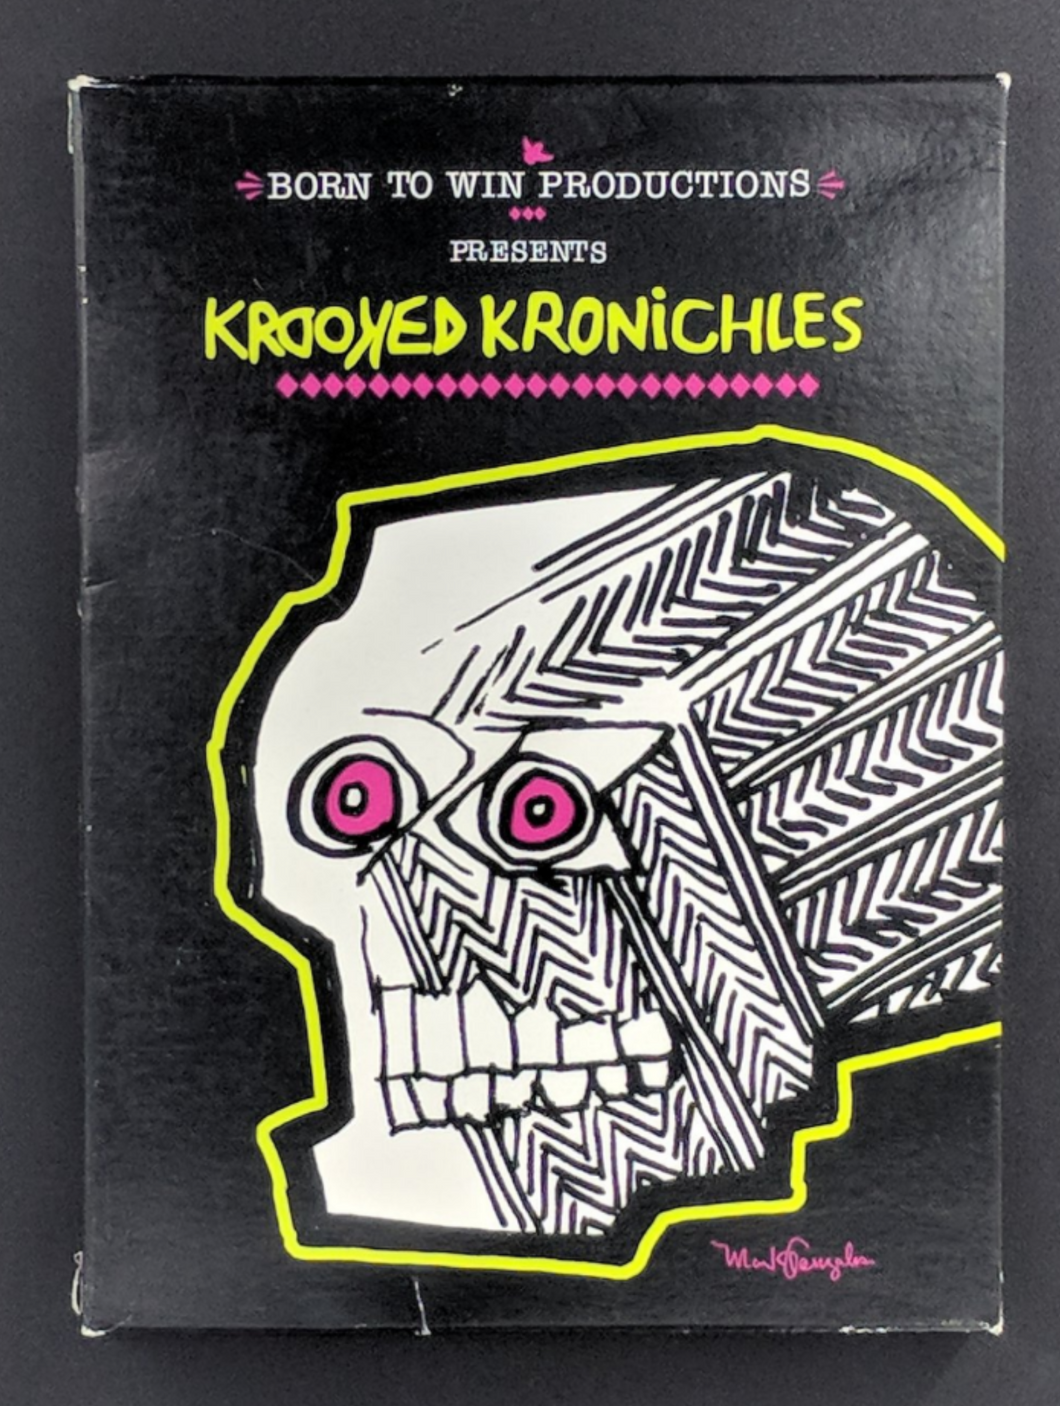 Krooked Kronicles